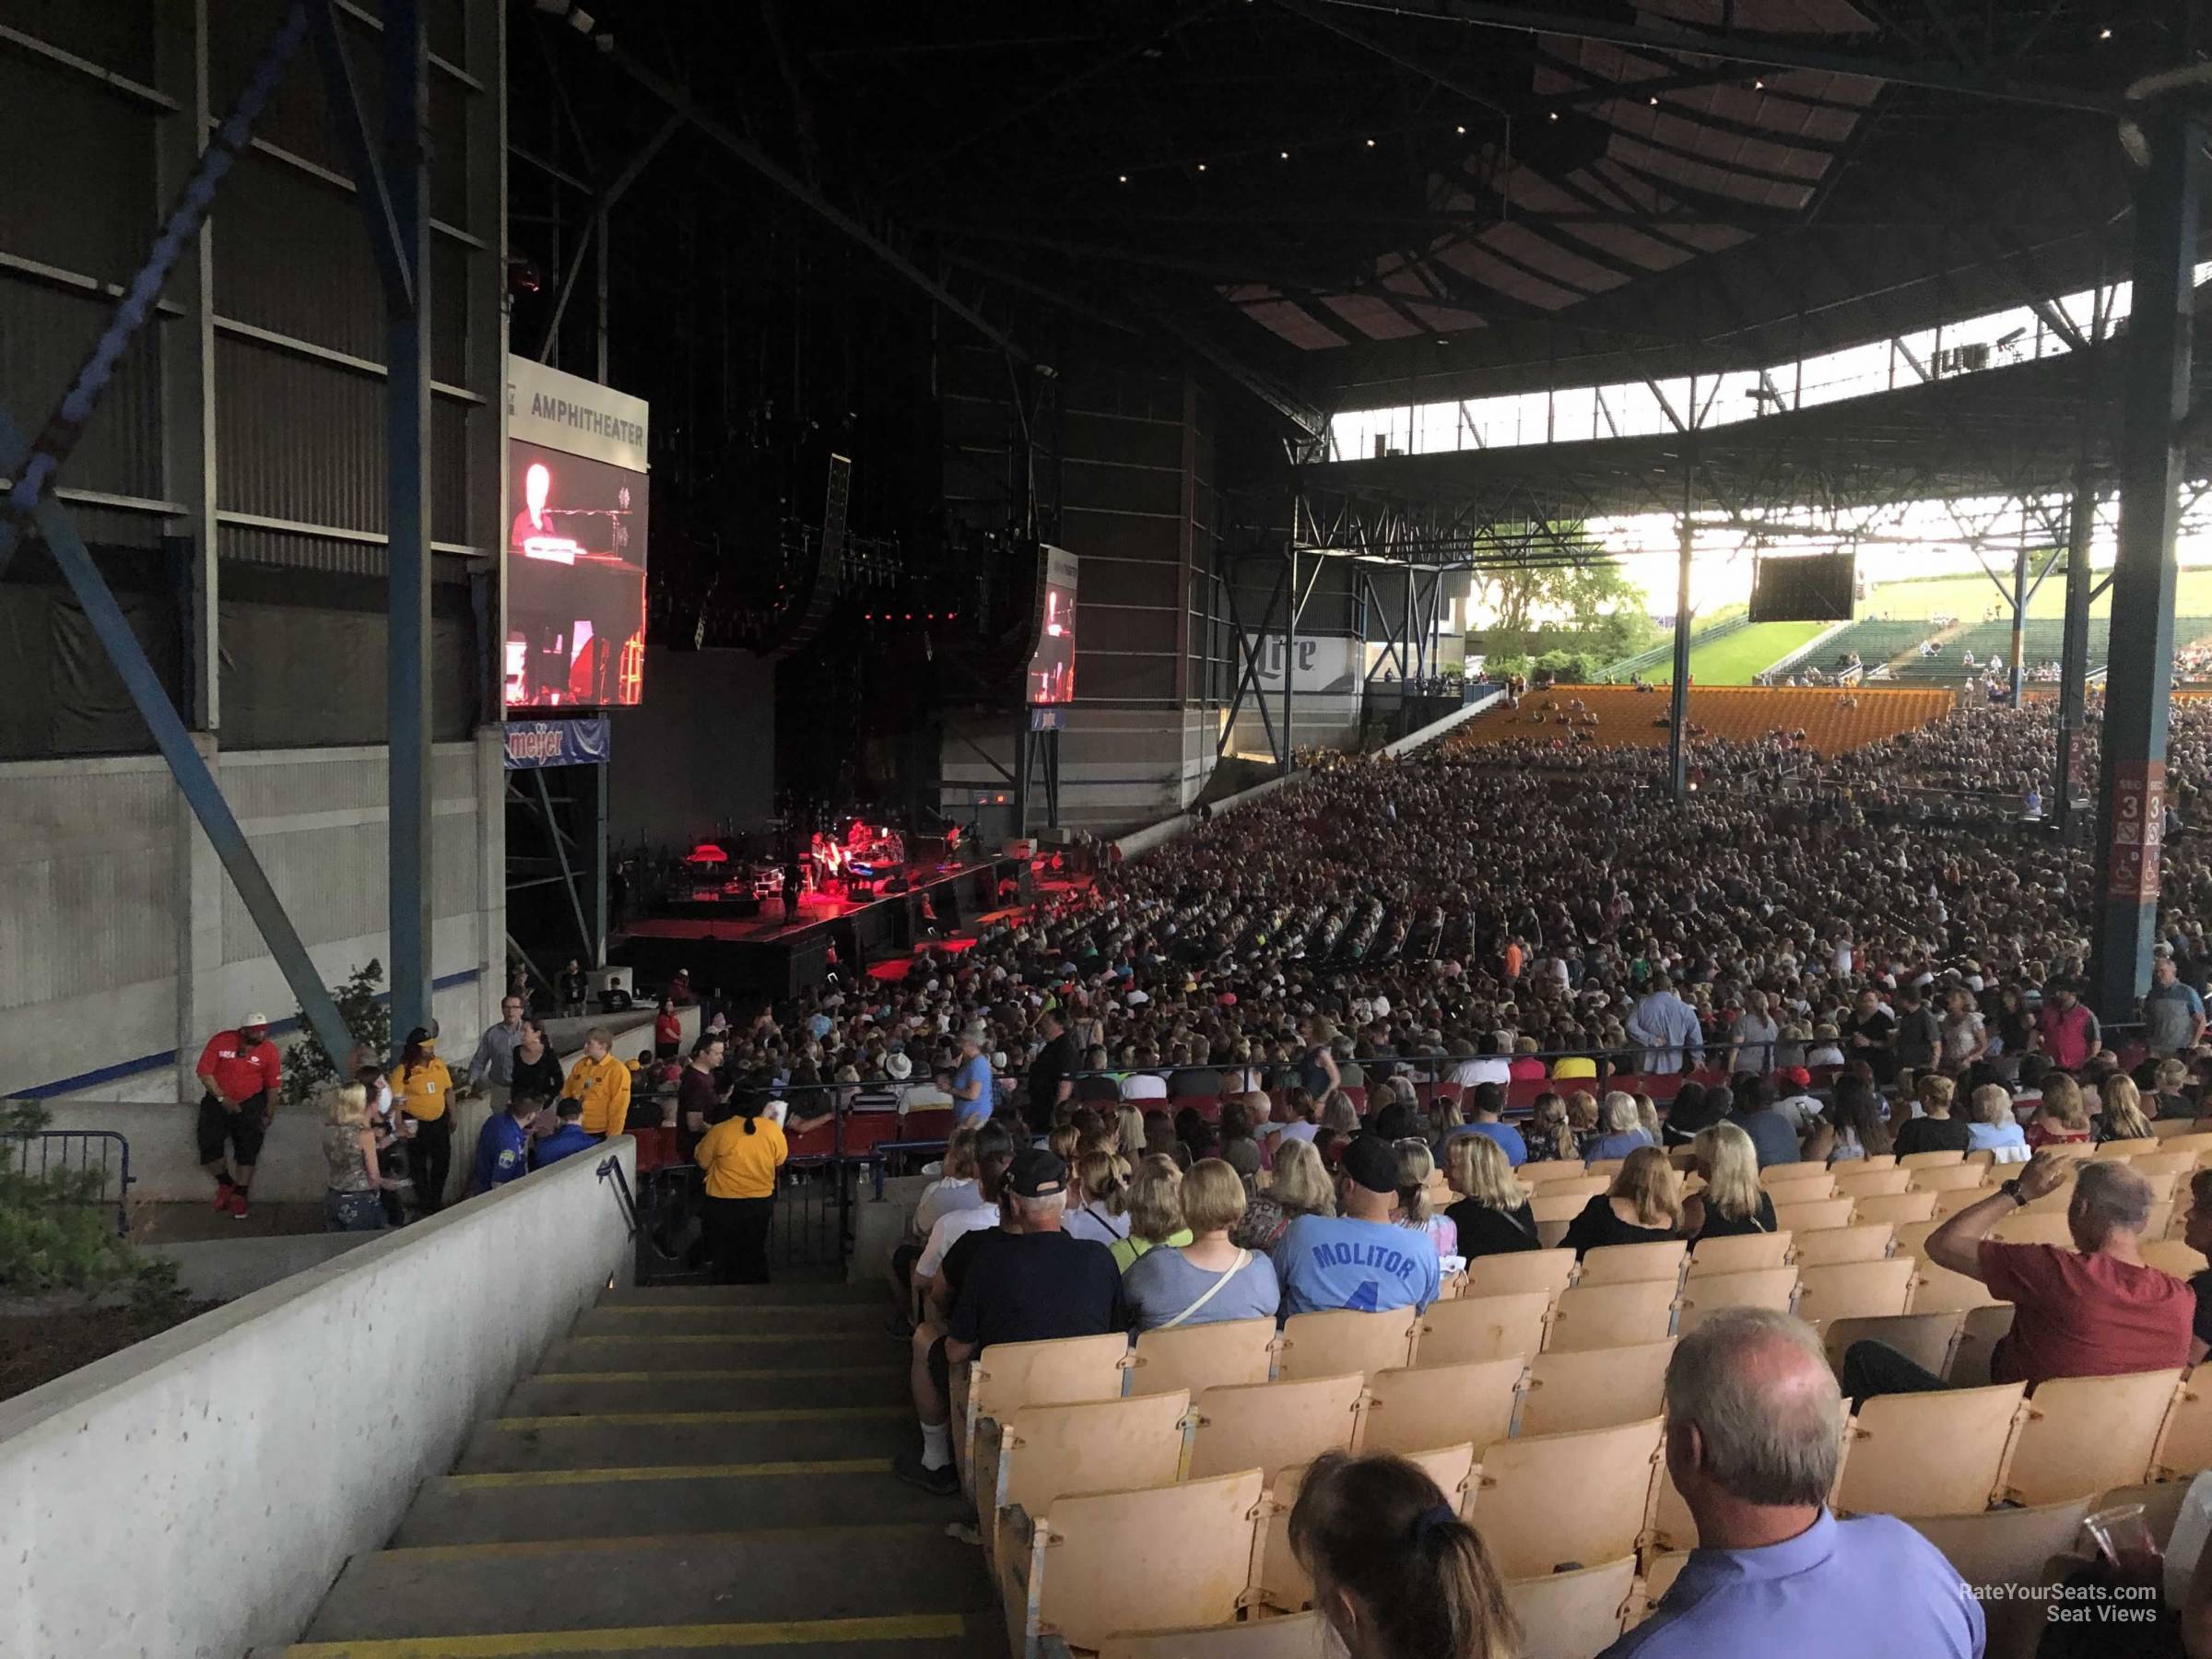 Section 210 at American Family Insurance Amphitheater